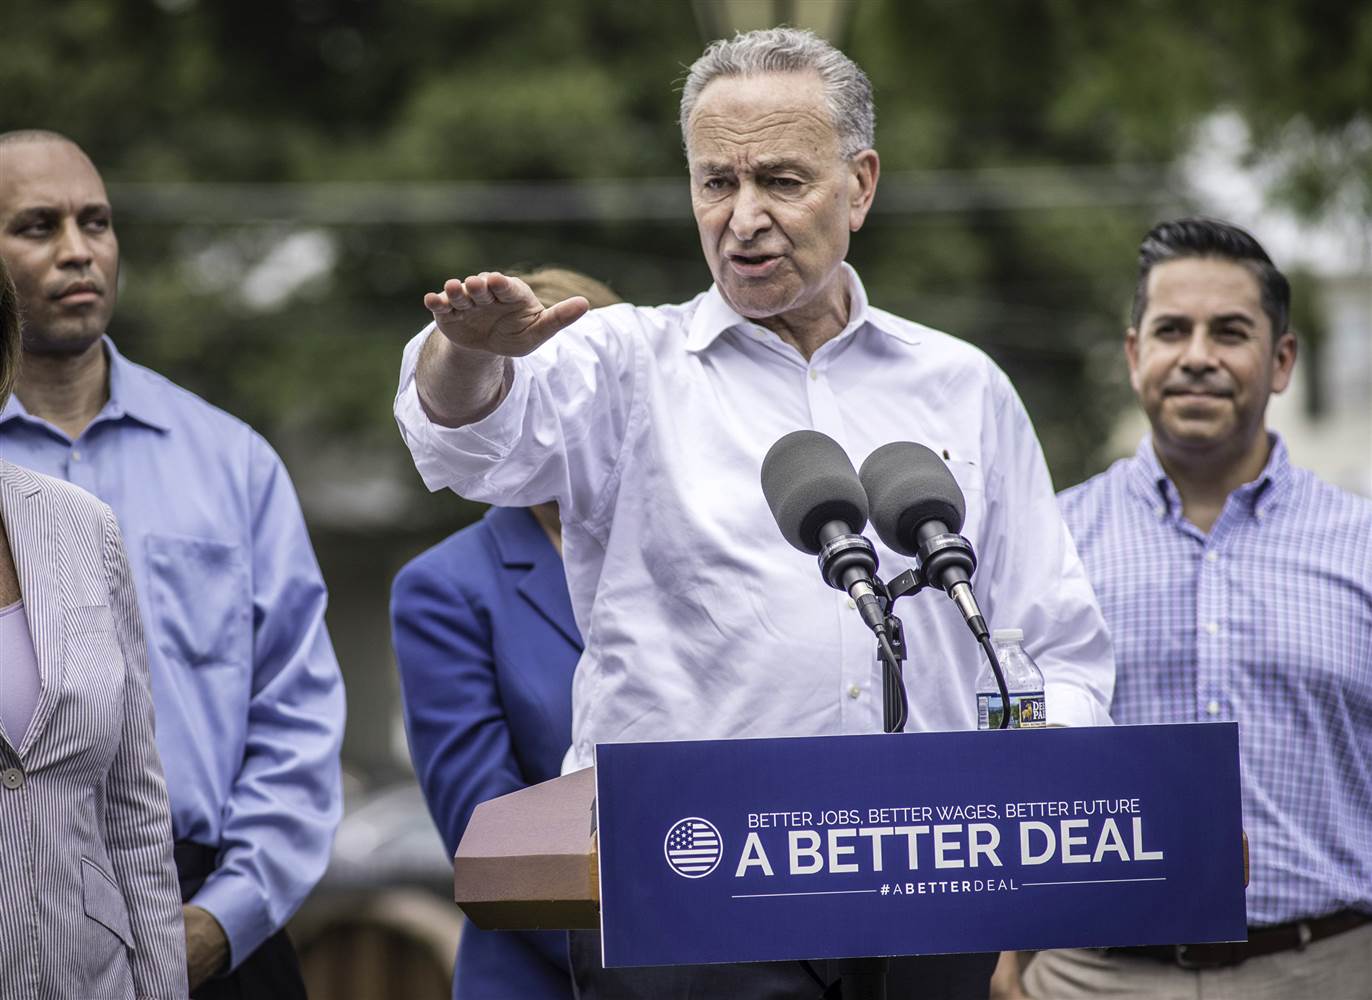 A BETTER DEAL: A NEW MESSAGE BY DEMOCRATS.